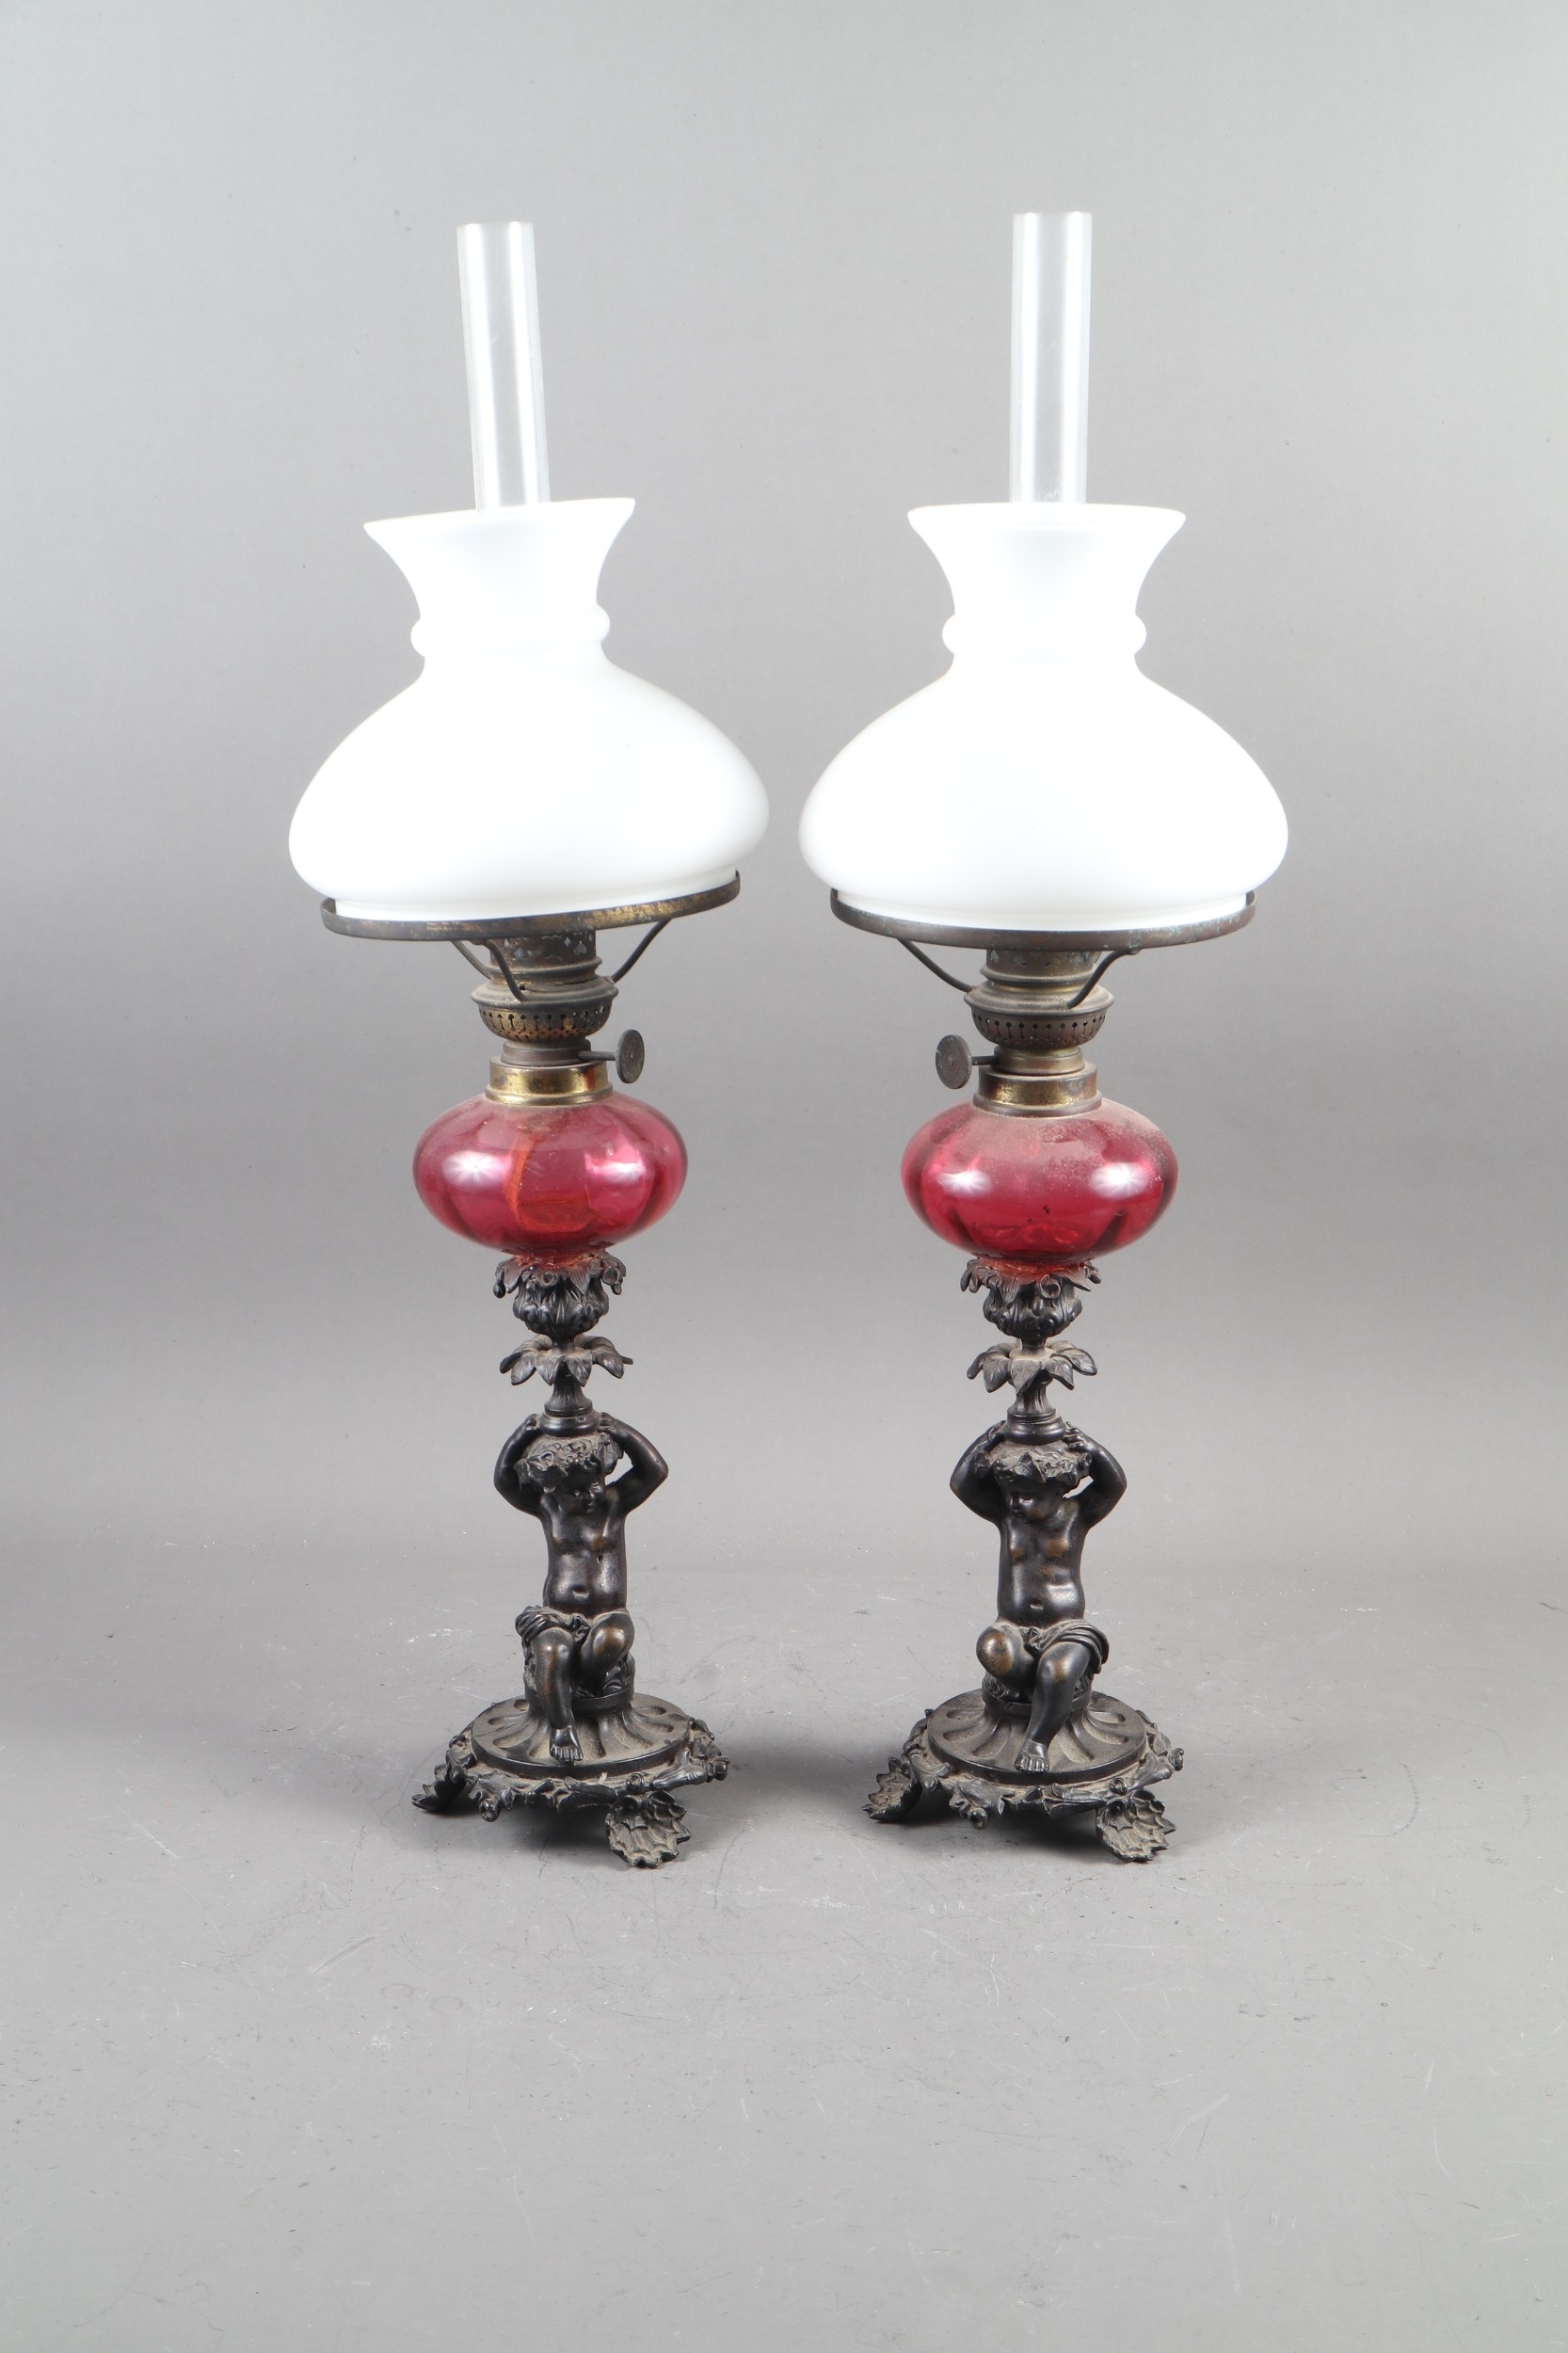 A pair of early 19th century patinated candlesticks, formed as putti, with later added ruby glass